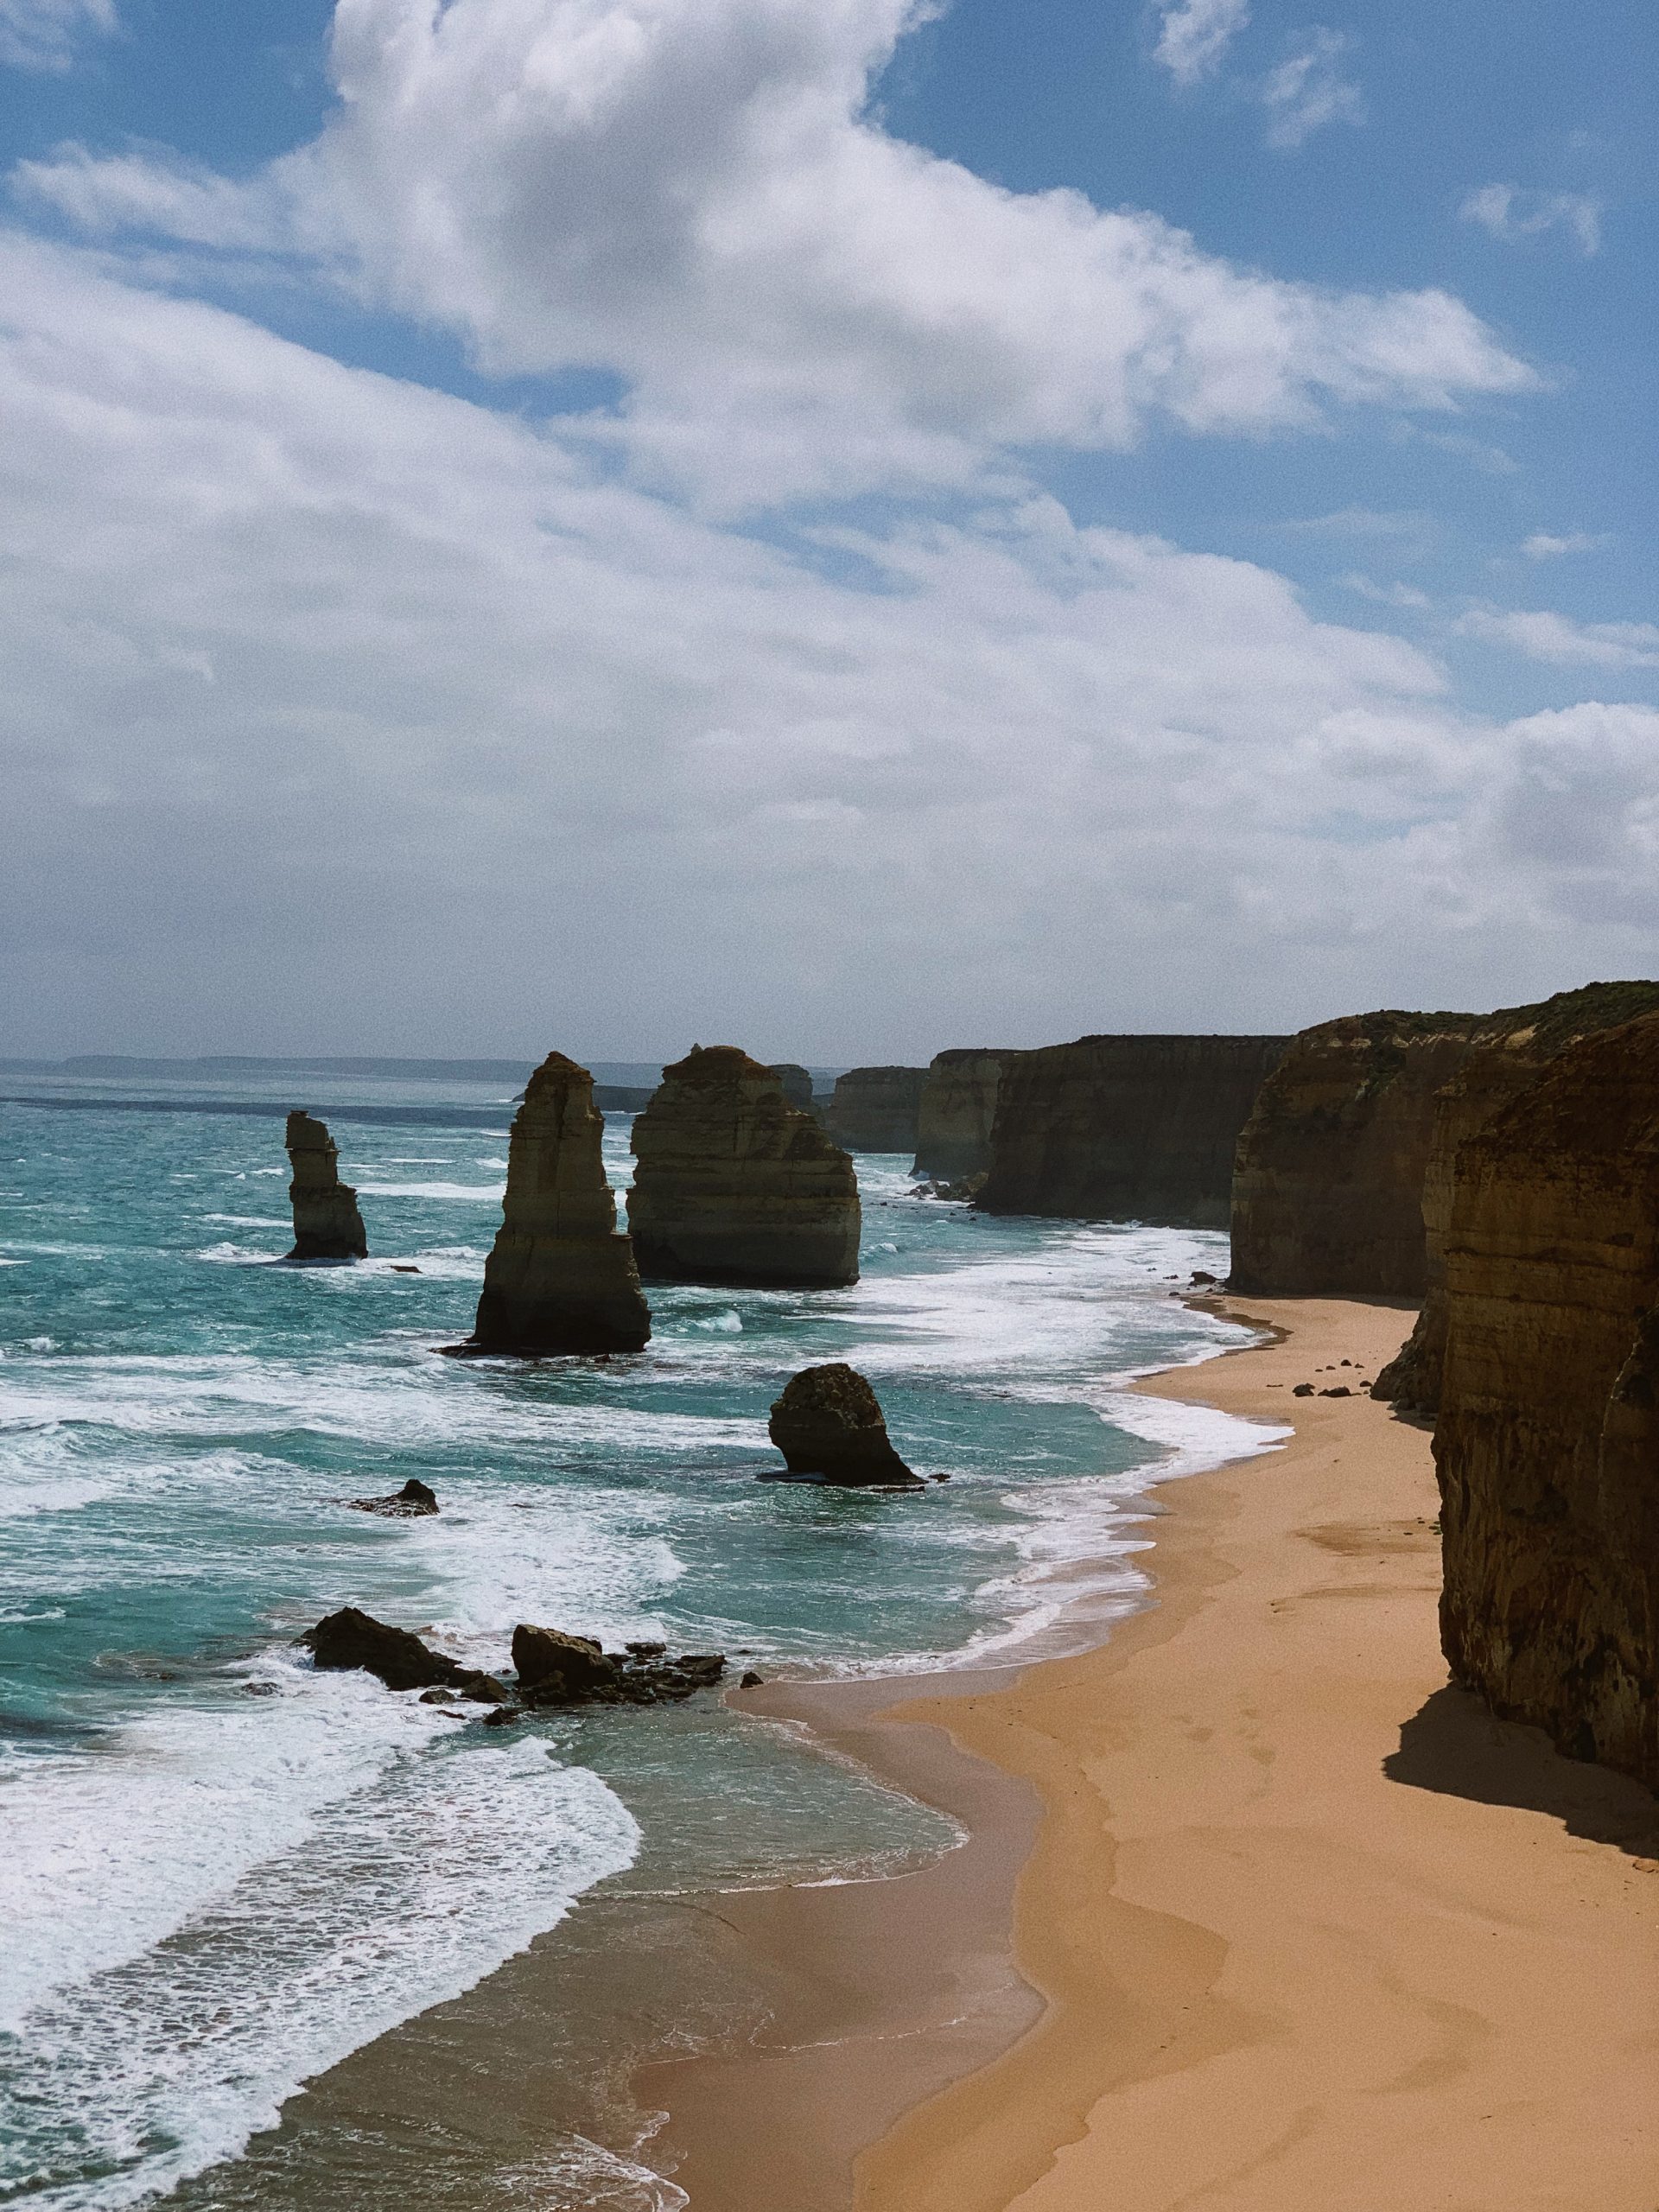 Can't Miss On The Great Ocean Road